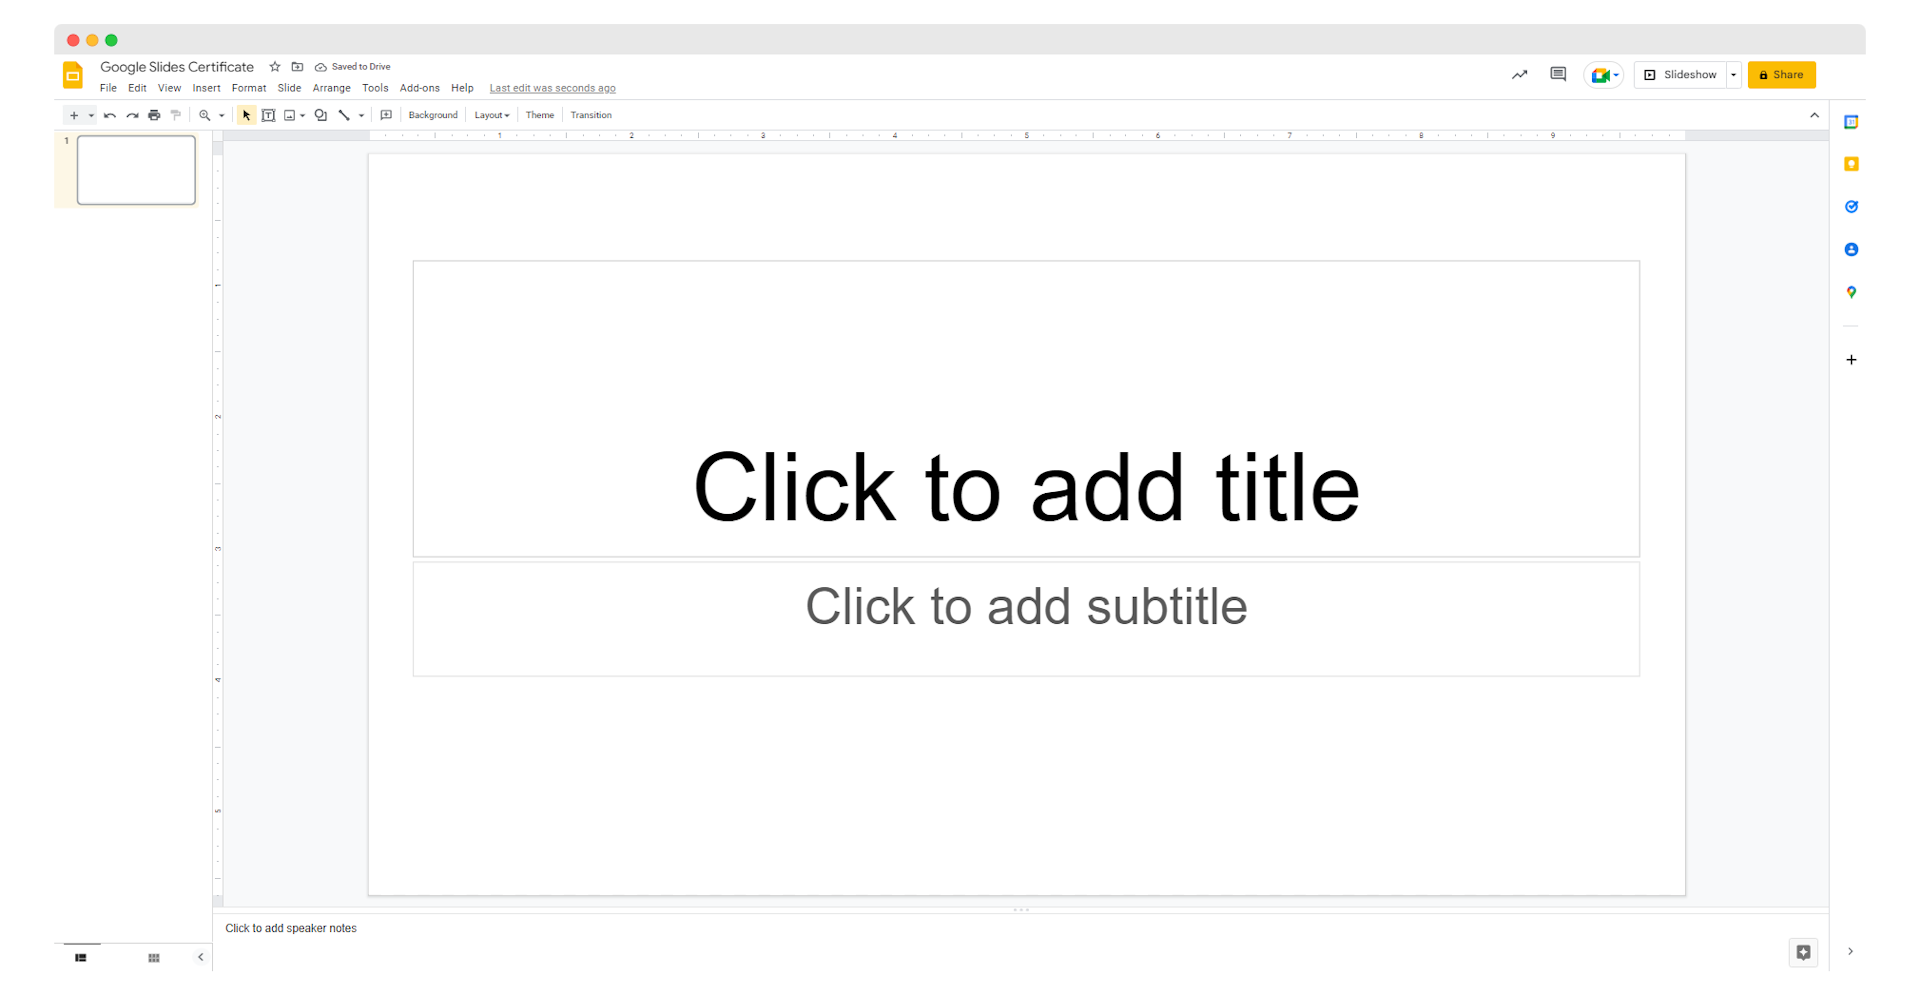 Generating multiple certificates with different names via Google Slides.